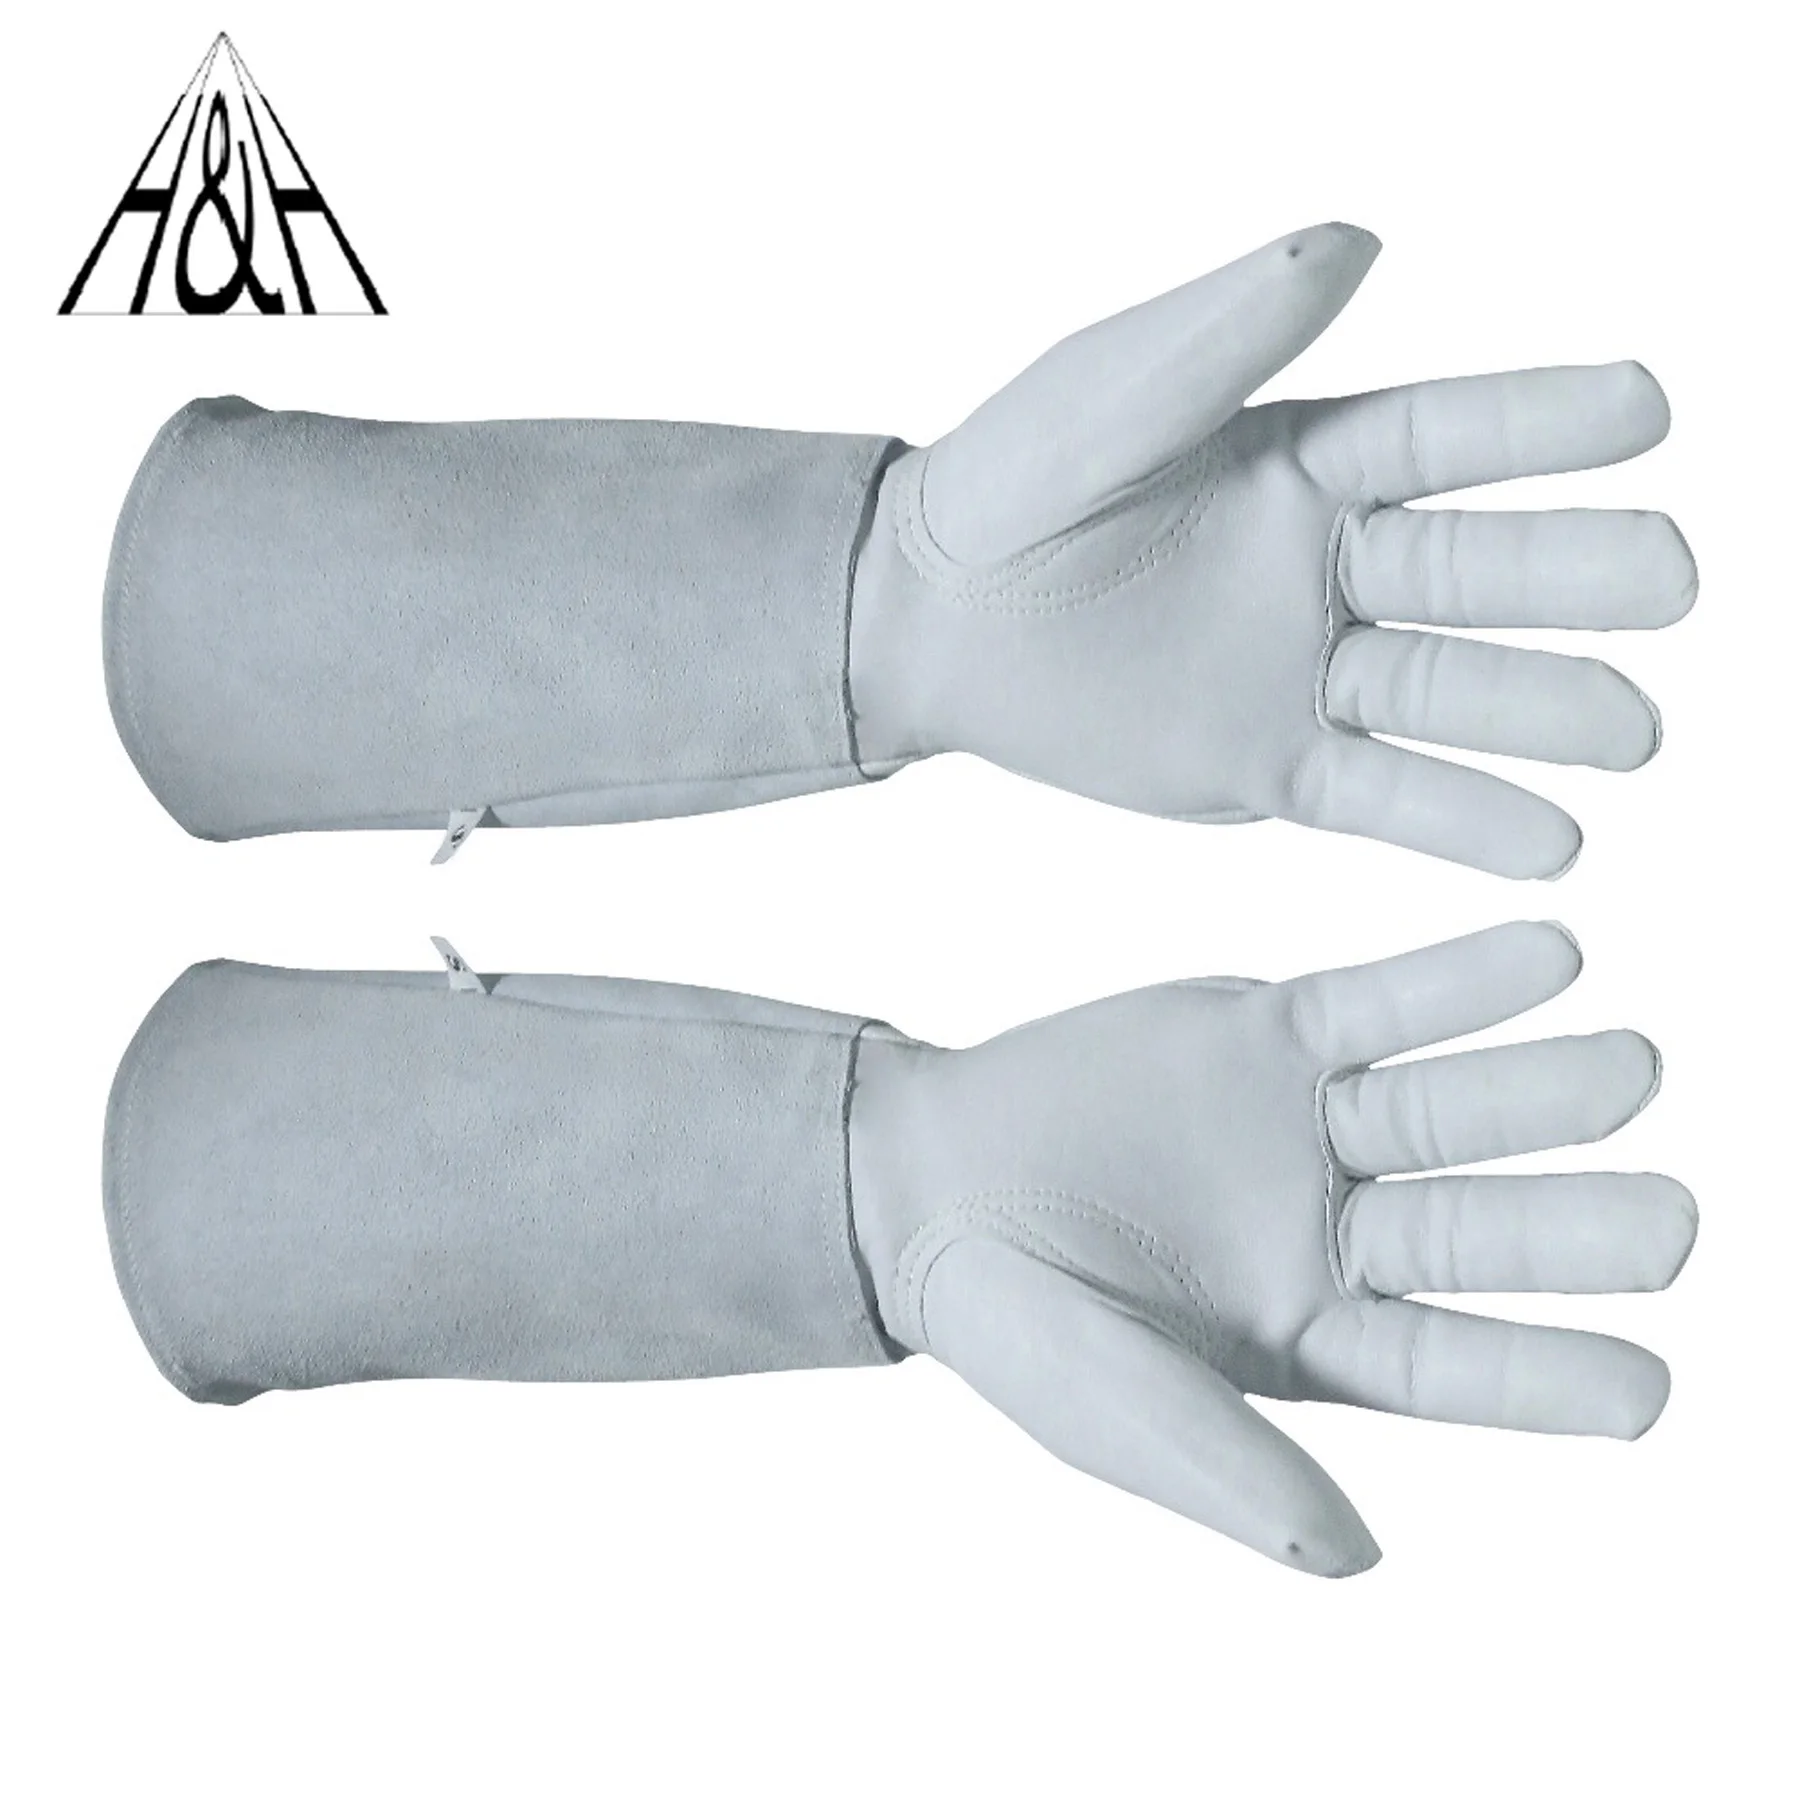 

HHPROTECT Rose Pruning Gloves Thron Proof Leather Gardening Gloves with Forearm Protection